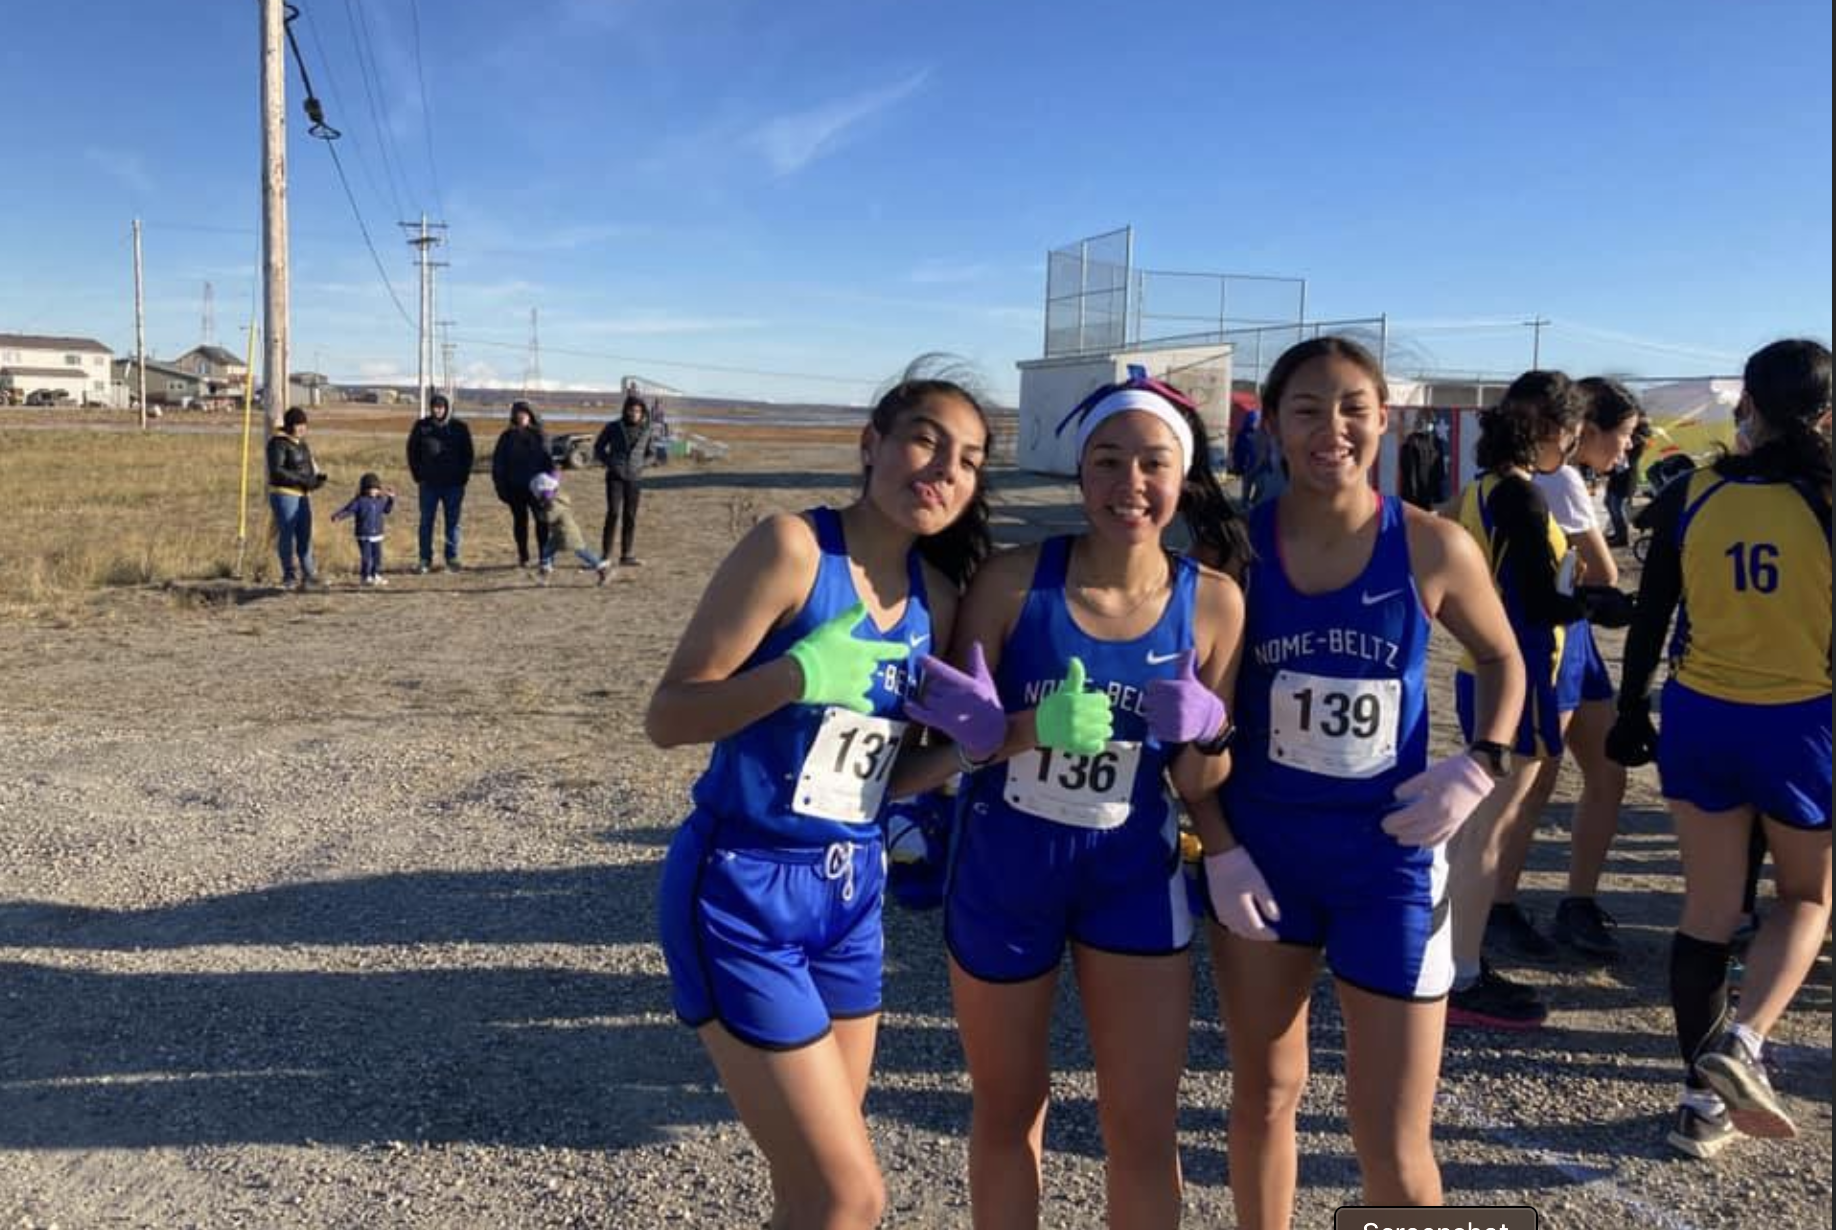 Three Nome girl athletes posing for a picture outside in the track uniforms.